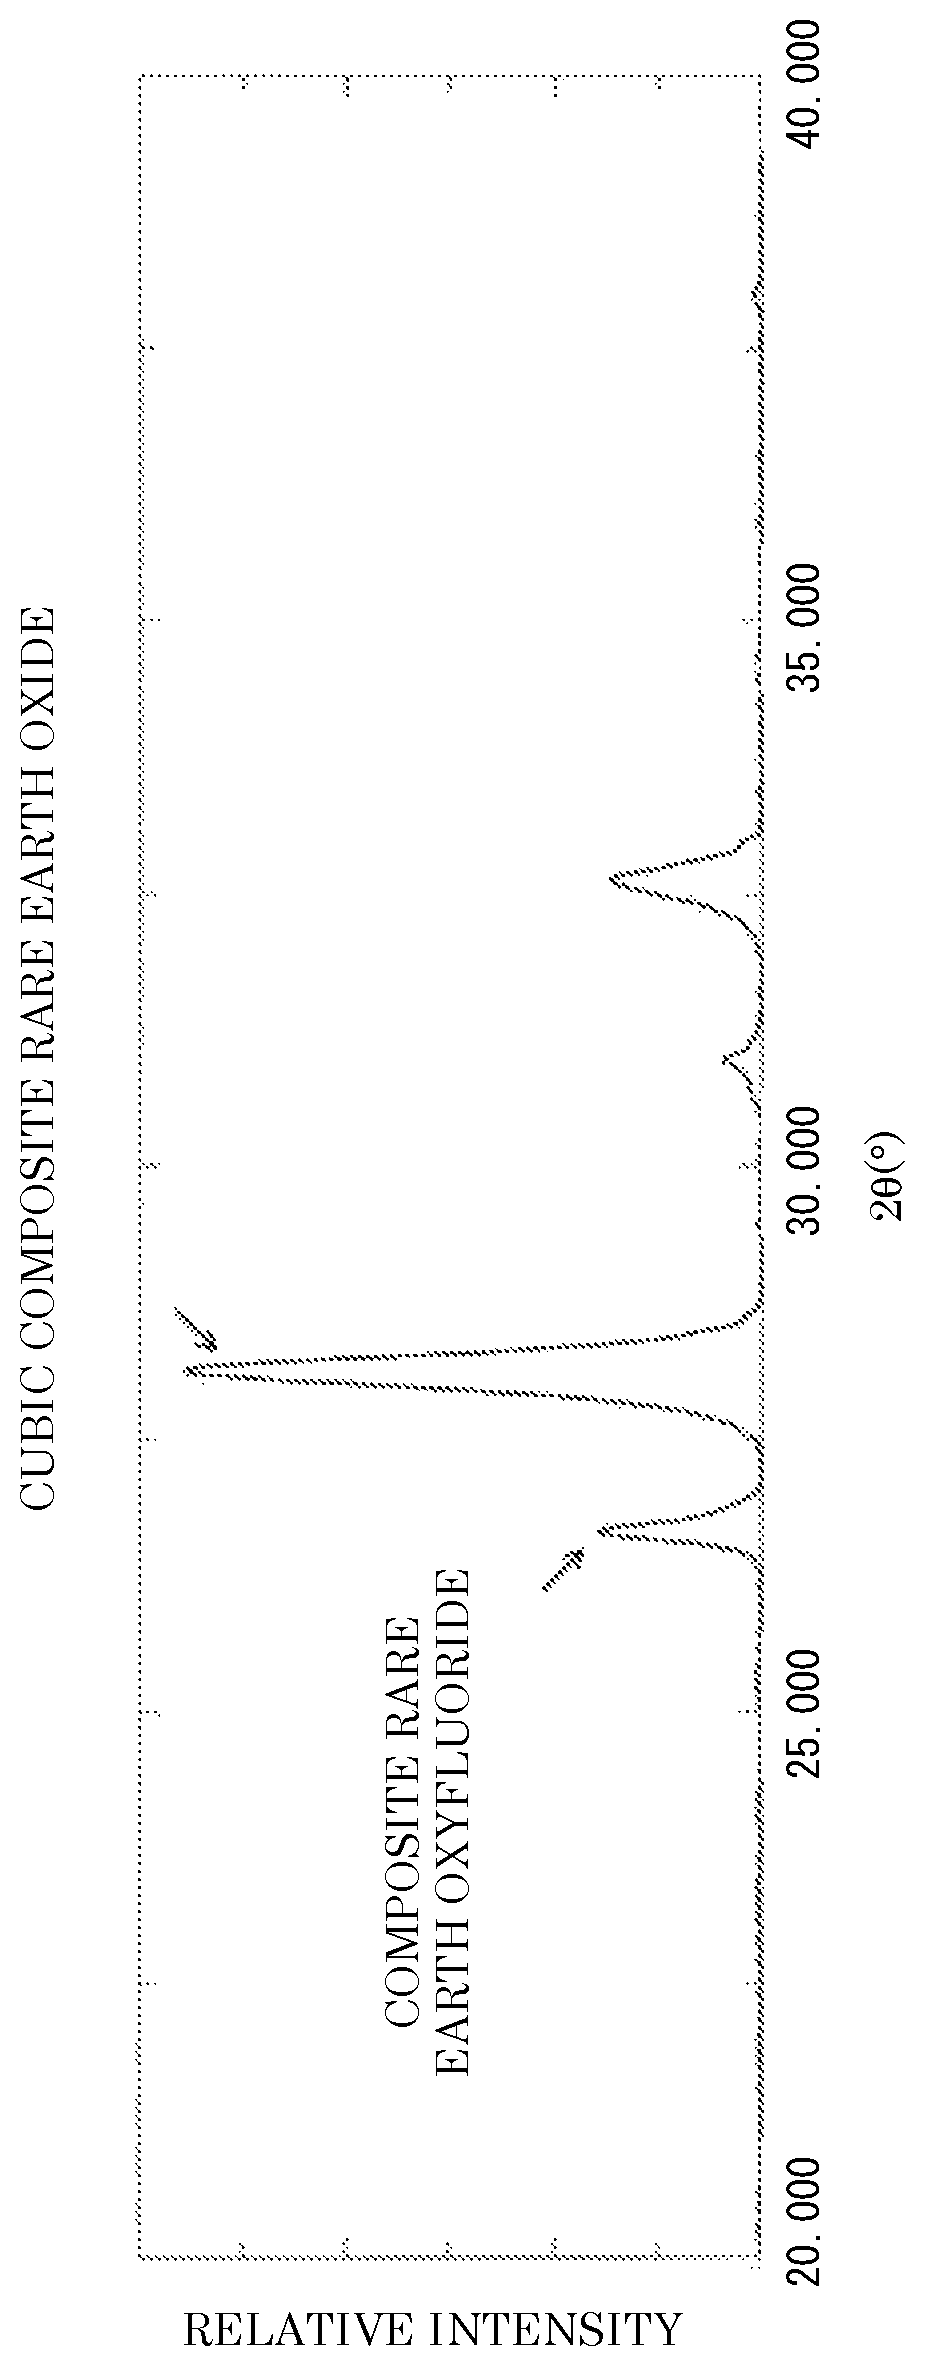 Cerium-based abrasive material and process for producing same